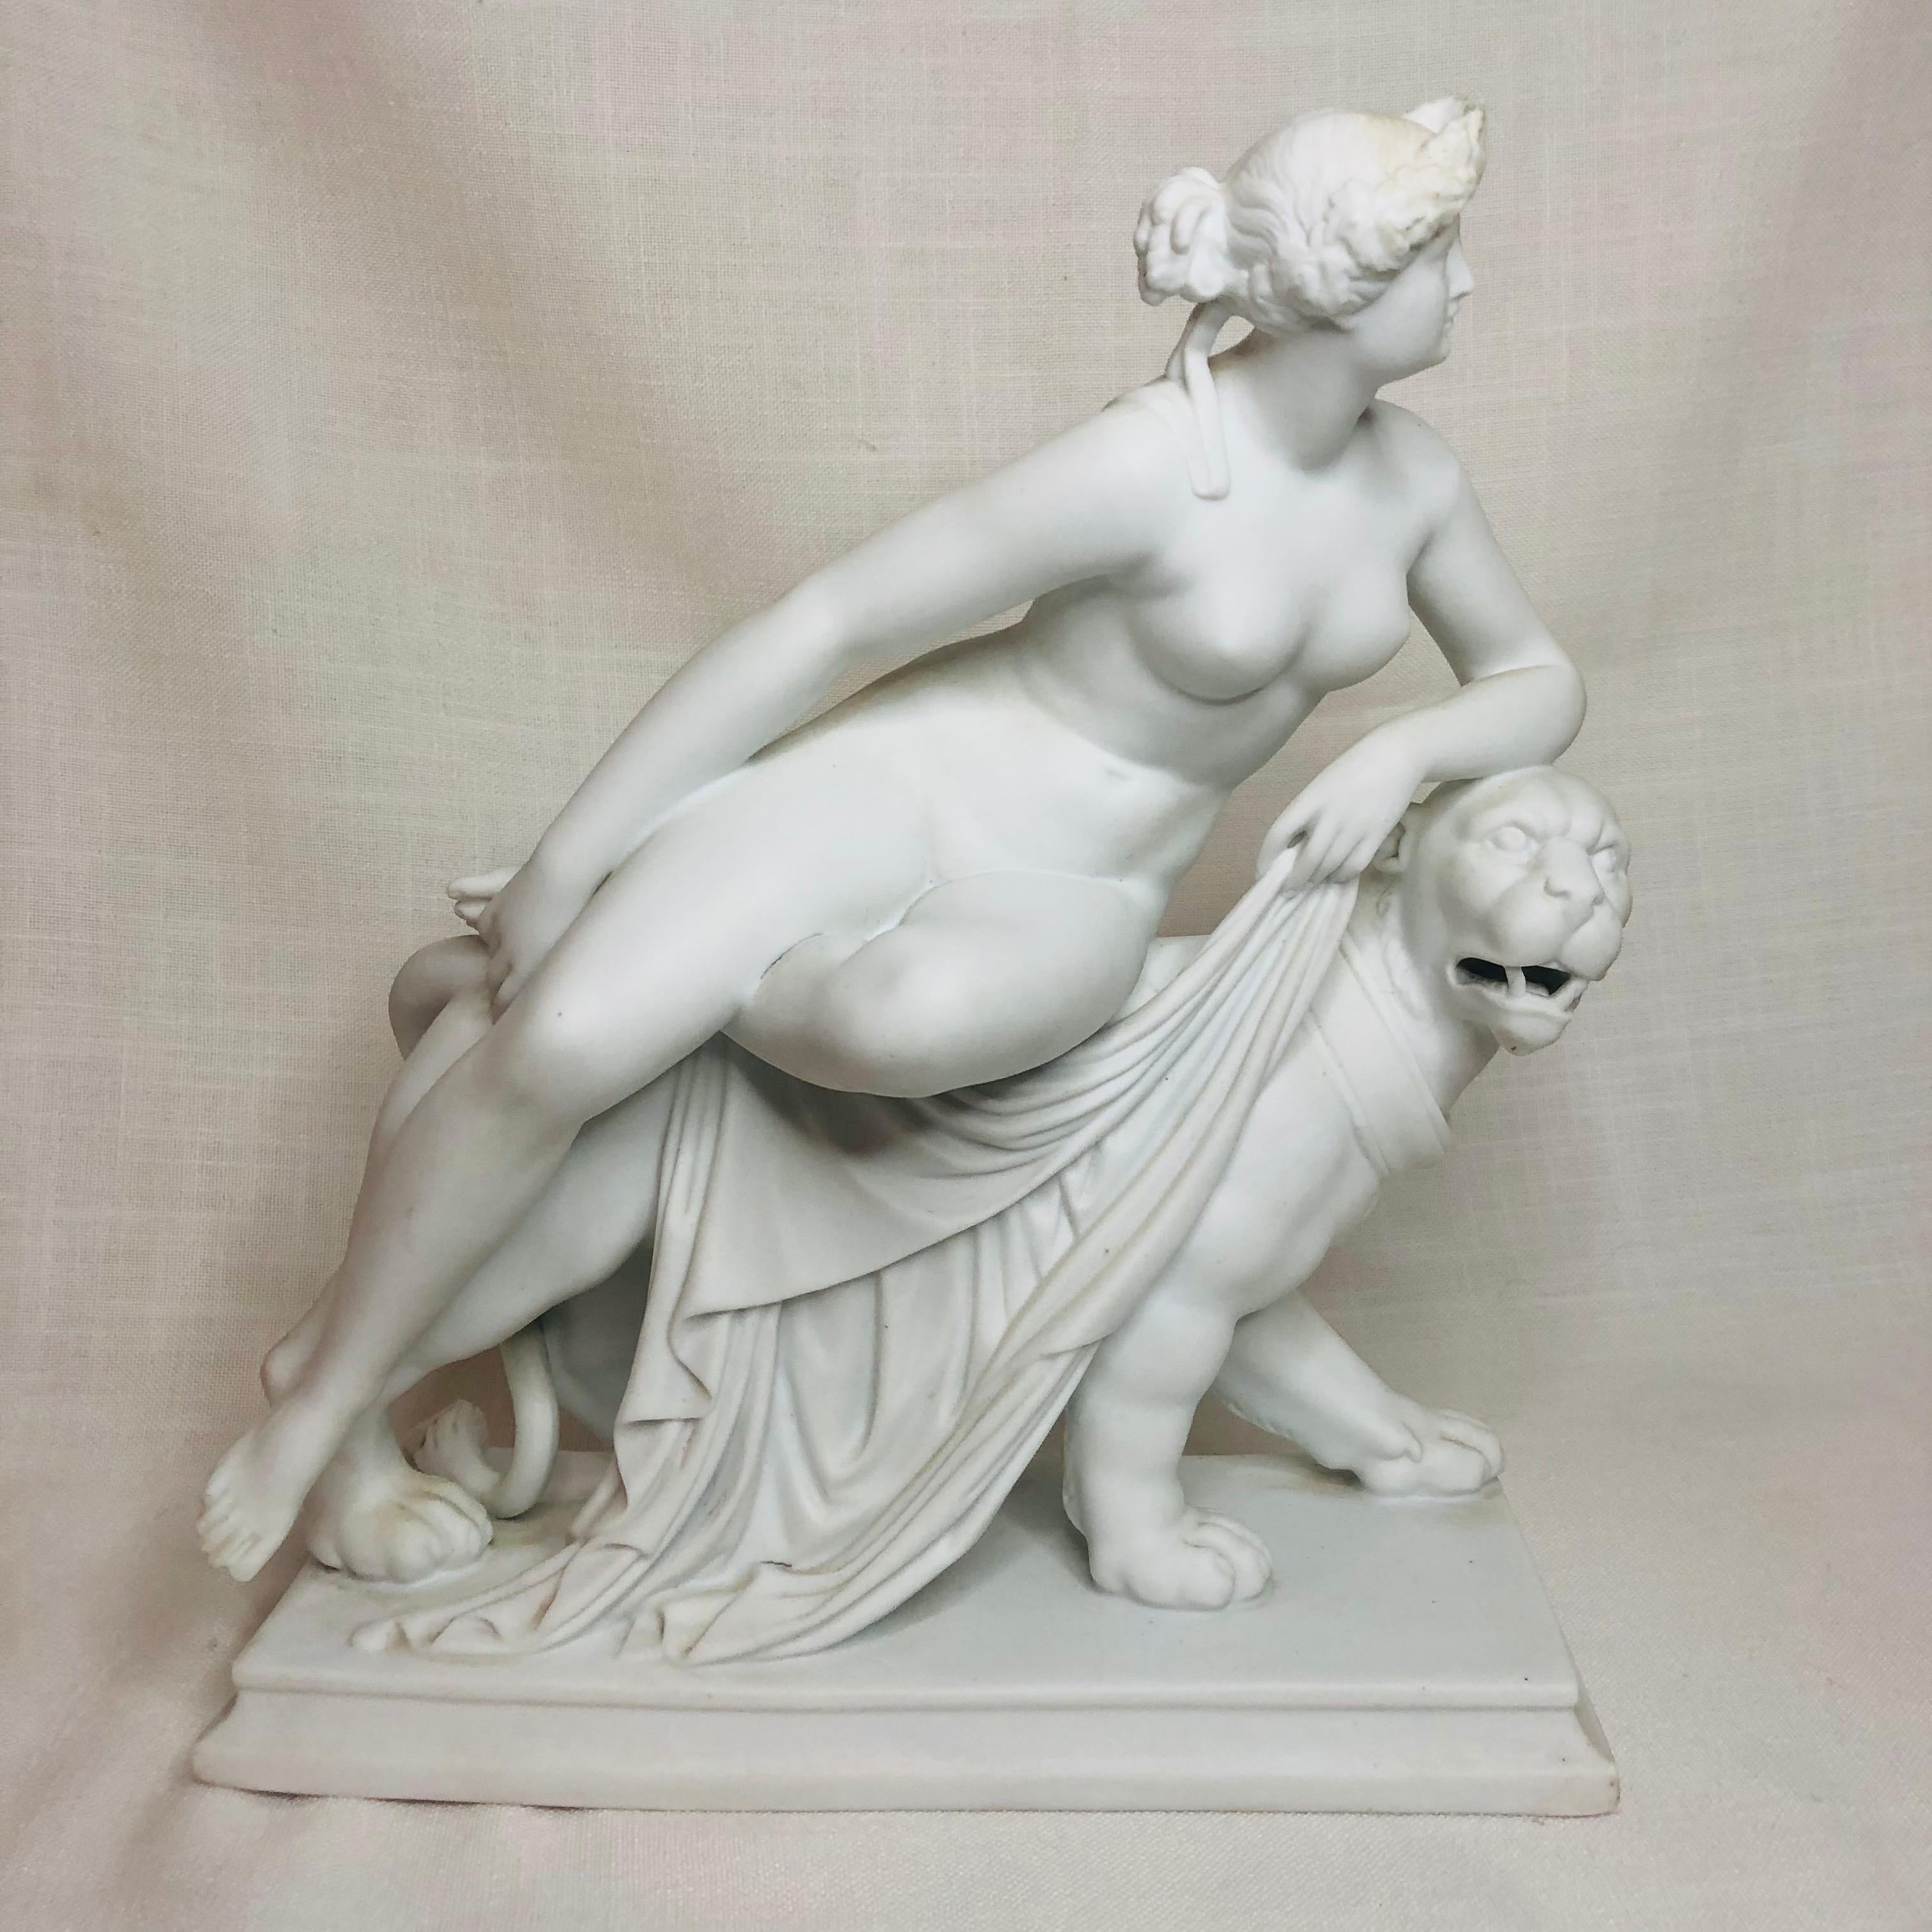 Molded English Parian Figurine of a Nude Figure of Adriadne Riding on Top of a Panther